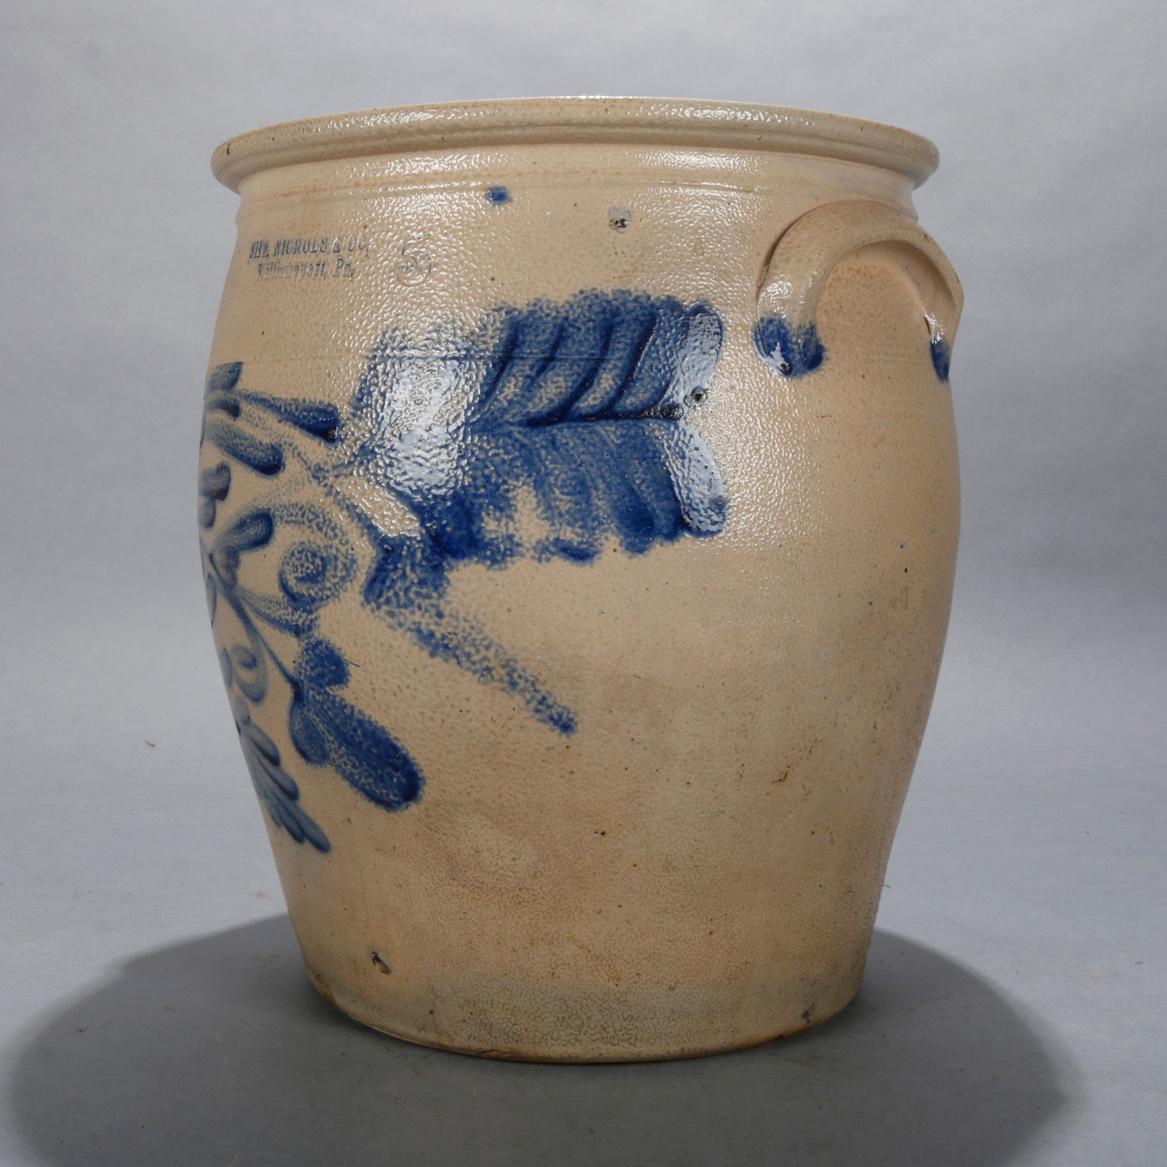 An antique stoneware crock by Sipe, Nichols & Co, Williamsport, PA offers #5 size with double handles and cobalt blue foliate decoration, 19th century

Measures: 14